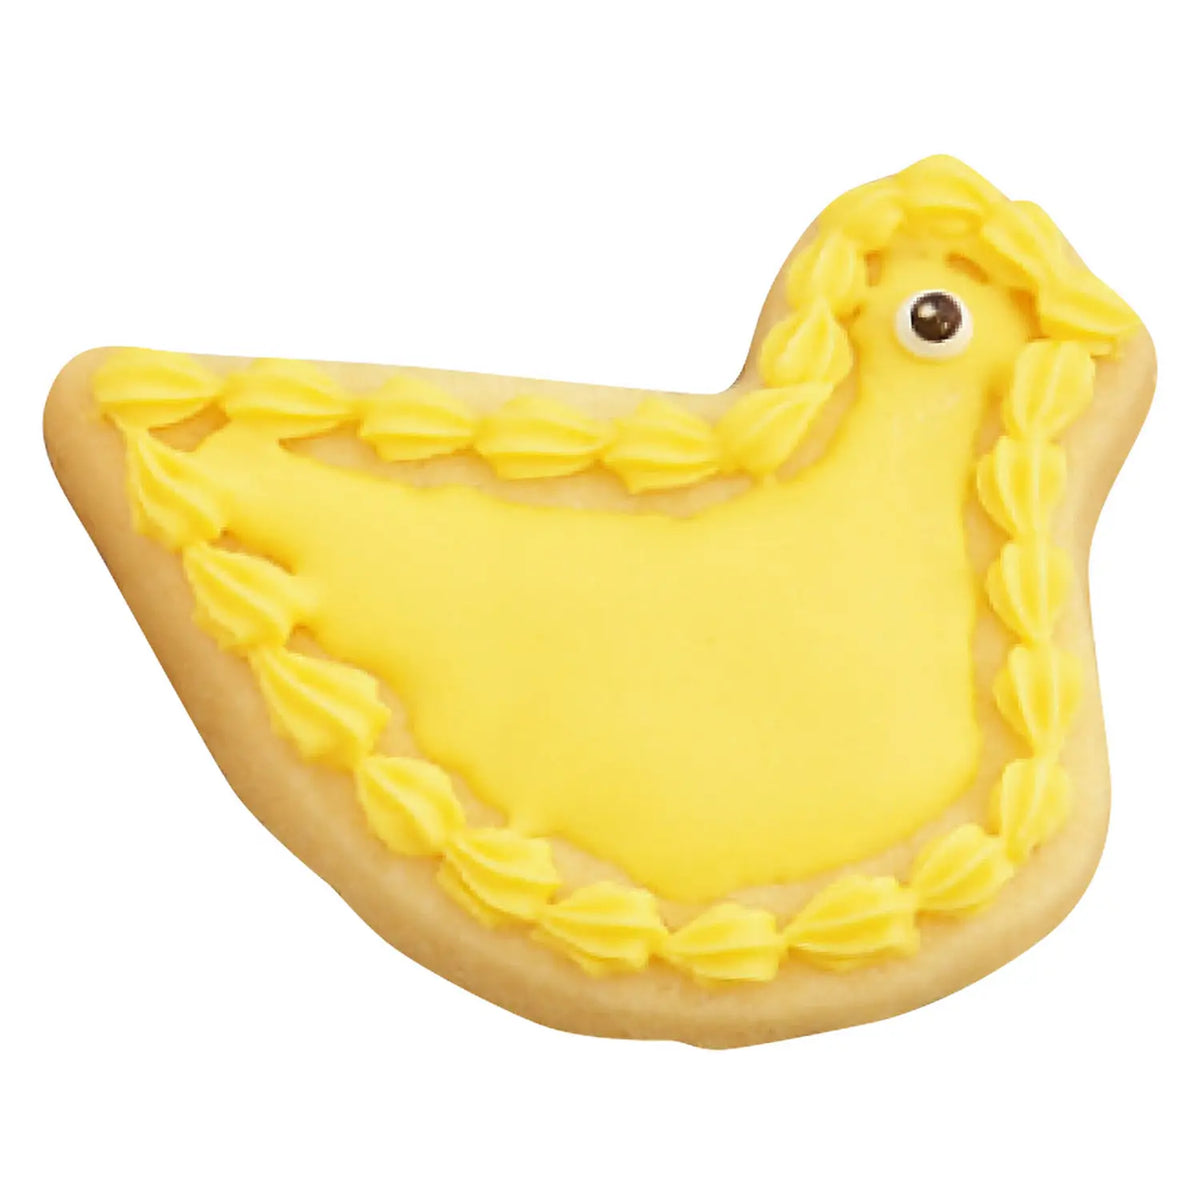 TIGERCROWN Cake Land Stainless Steel Cookie Cutter Duck